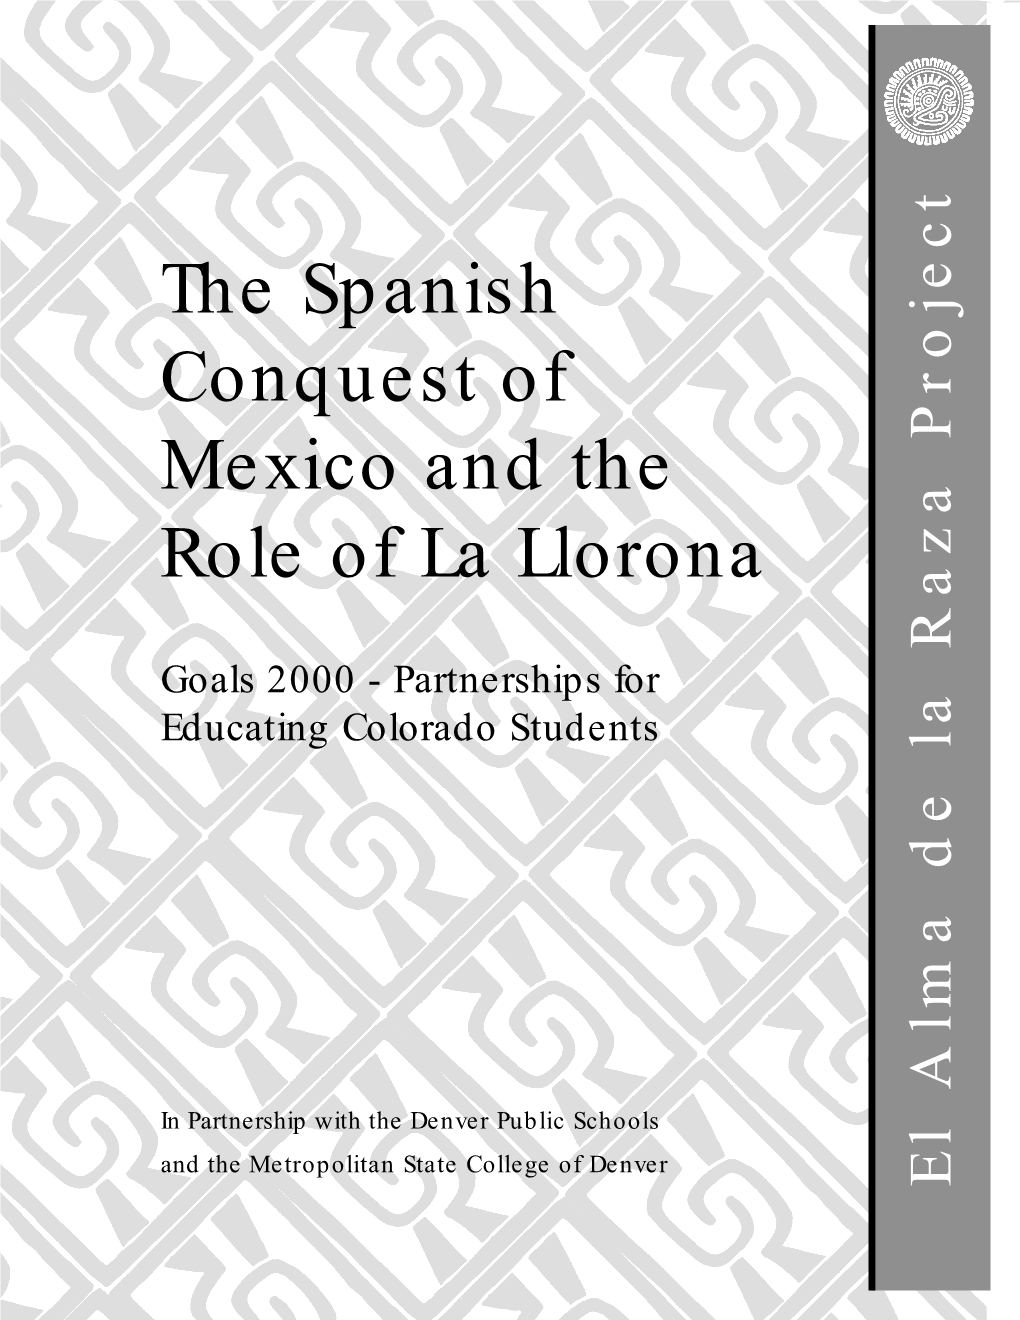 The Spanish Conquest of Mexico and the Role of La Llorona by Leni Arnett